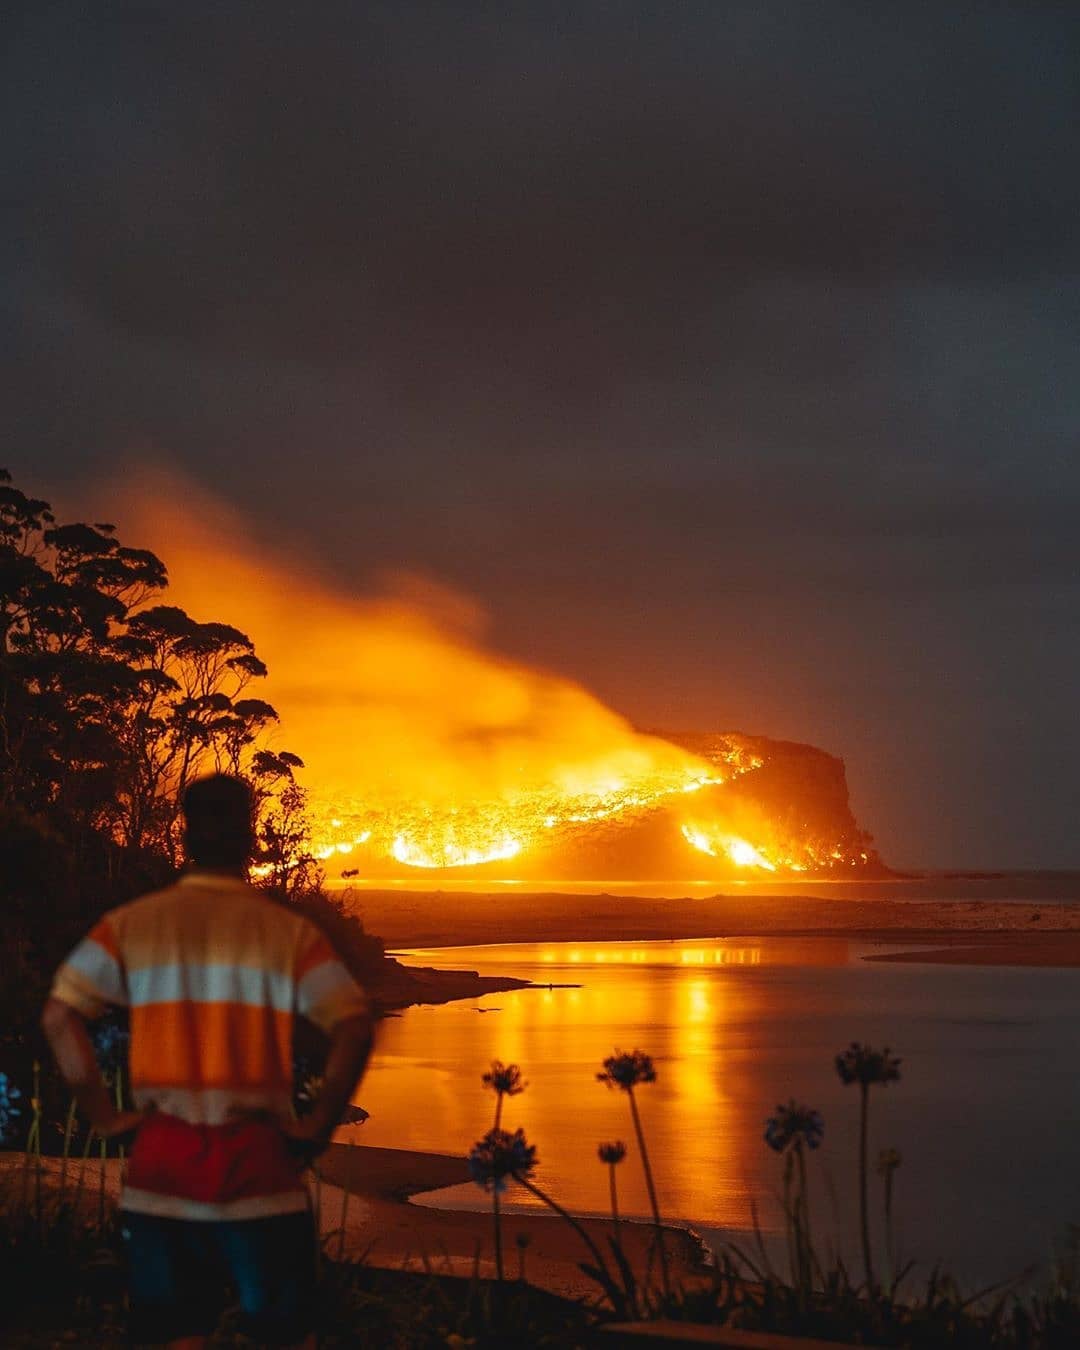 Reposted from @josh_burkinshaw  And here is Number 2 in my top 5 count down. It’s a good reminder to what’s happening here in Australia at the moment. Please take care to all in affected areas. It’s time for change right now. 
A day and night I will never forget. .
.
.
.
.
.
.
.
.
.
#earthoutdoors #earth #earthpix #yourshotphotographer #depthsofearth #timeforchange #sonyimages #sonyalpha #natgeo #thisisliving #seeaustralia #southcoast #australia #top5 #discoverearth #stayandwander #depthsofearth #moodygrams #visualsofearth #createcommune #voyaged #newsouthwales #hellofrom #thisweekoninstagram #travelgram #earthfocus #earthofficial #bushfiresaustralia #artofvisuals #lensbible #moodnation